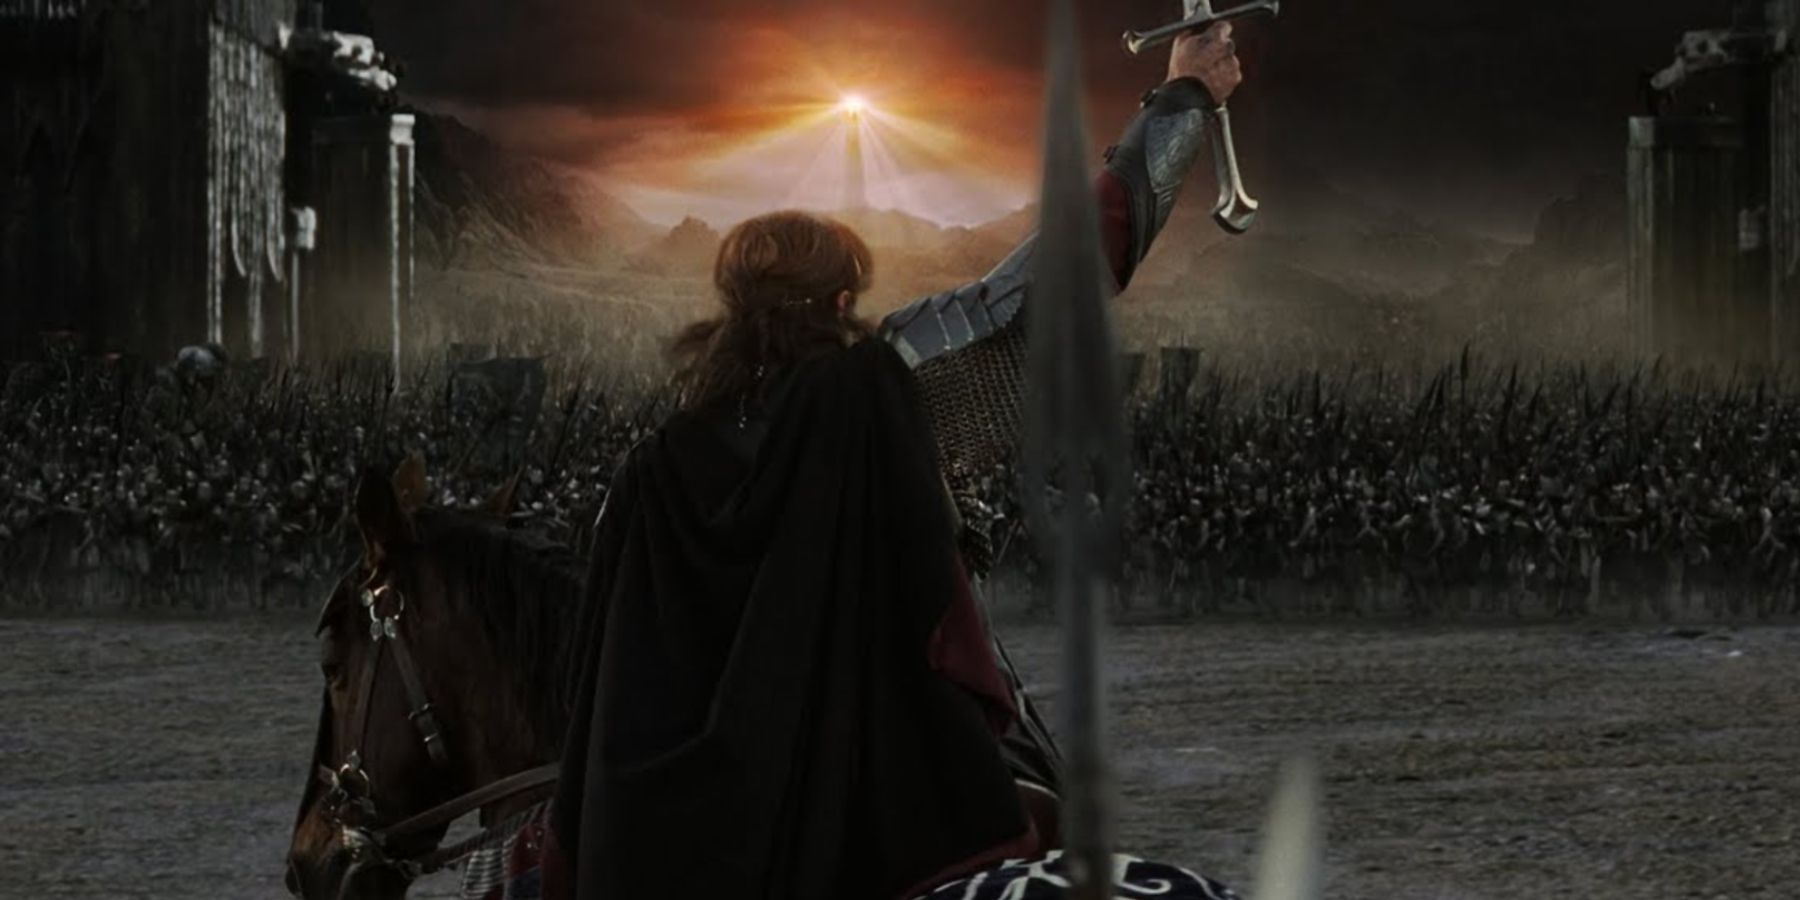 Battle of the Black Gate in The Lord of the Rings